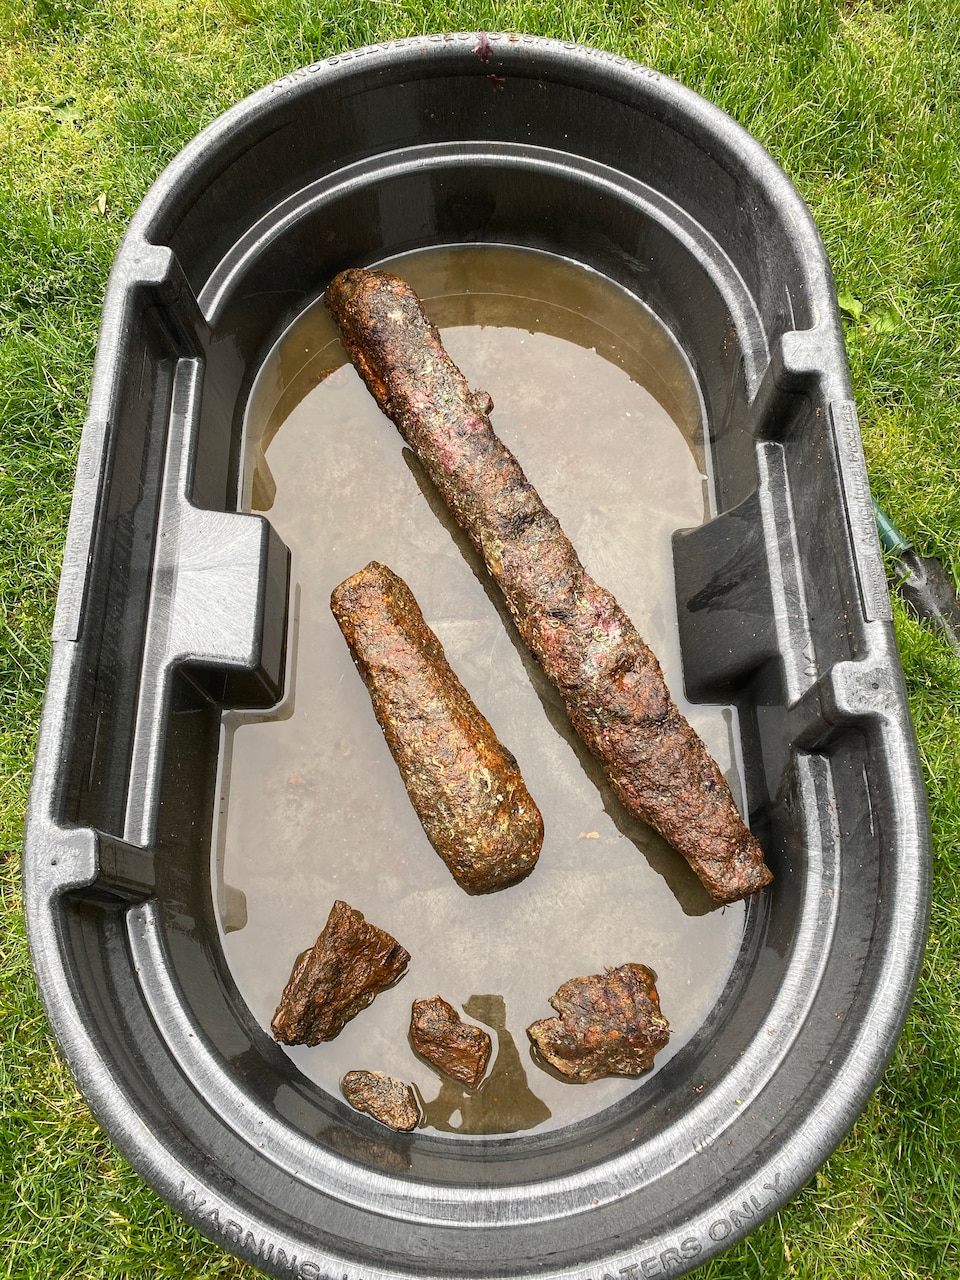 Concreted artifacts, sample fragments of pig iron ballast, recovered from the site.